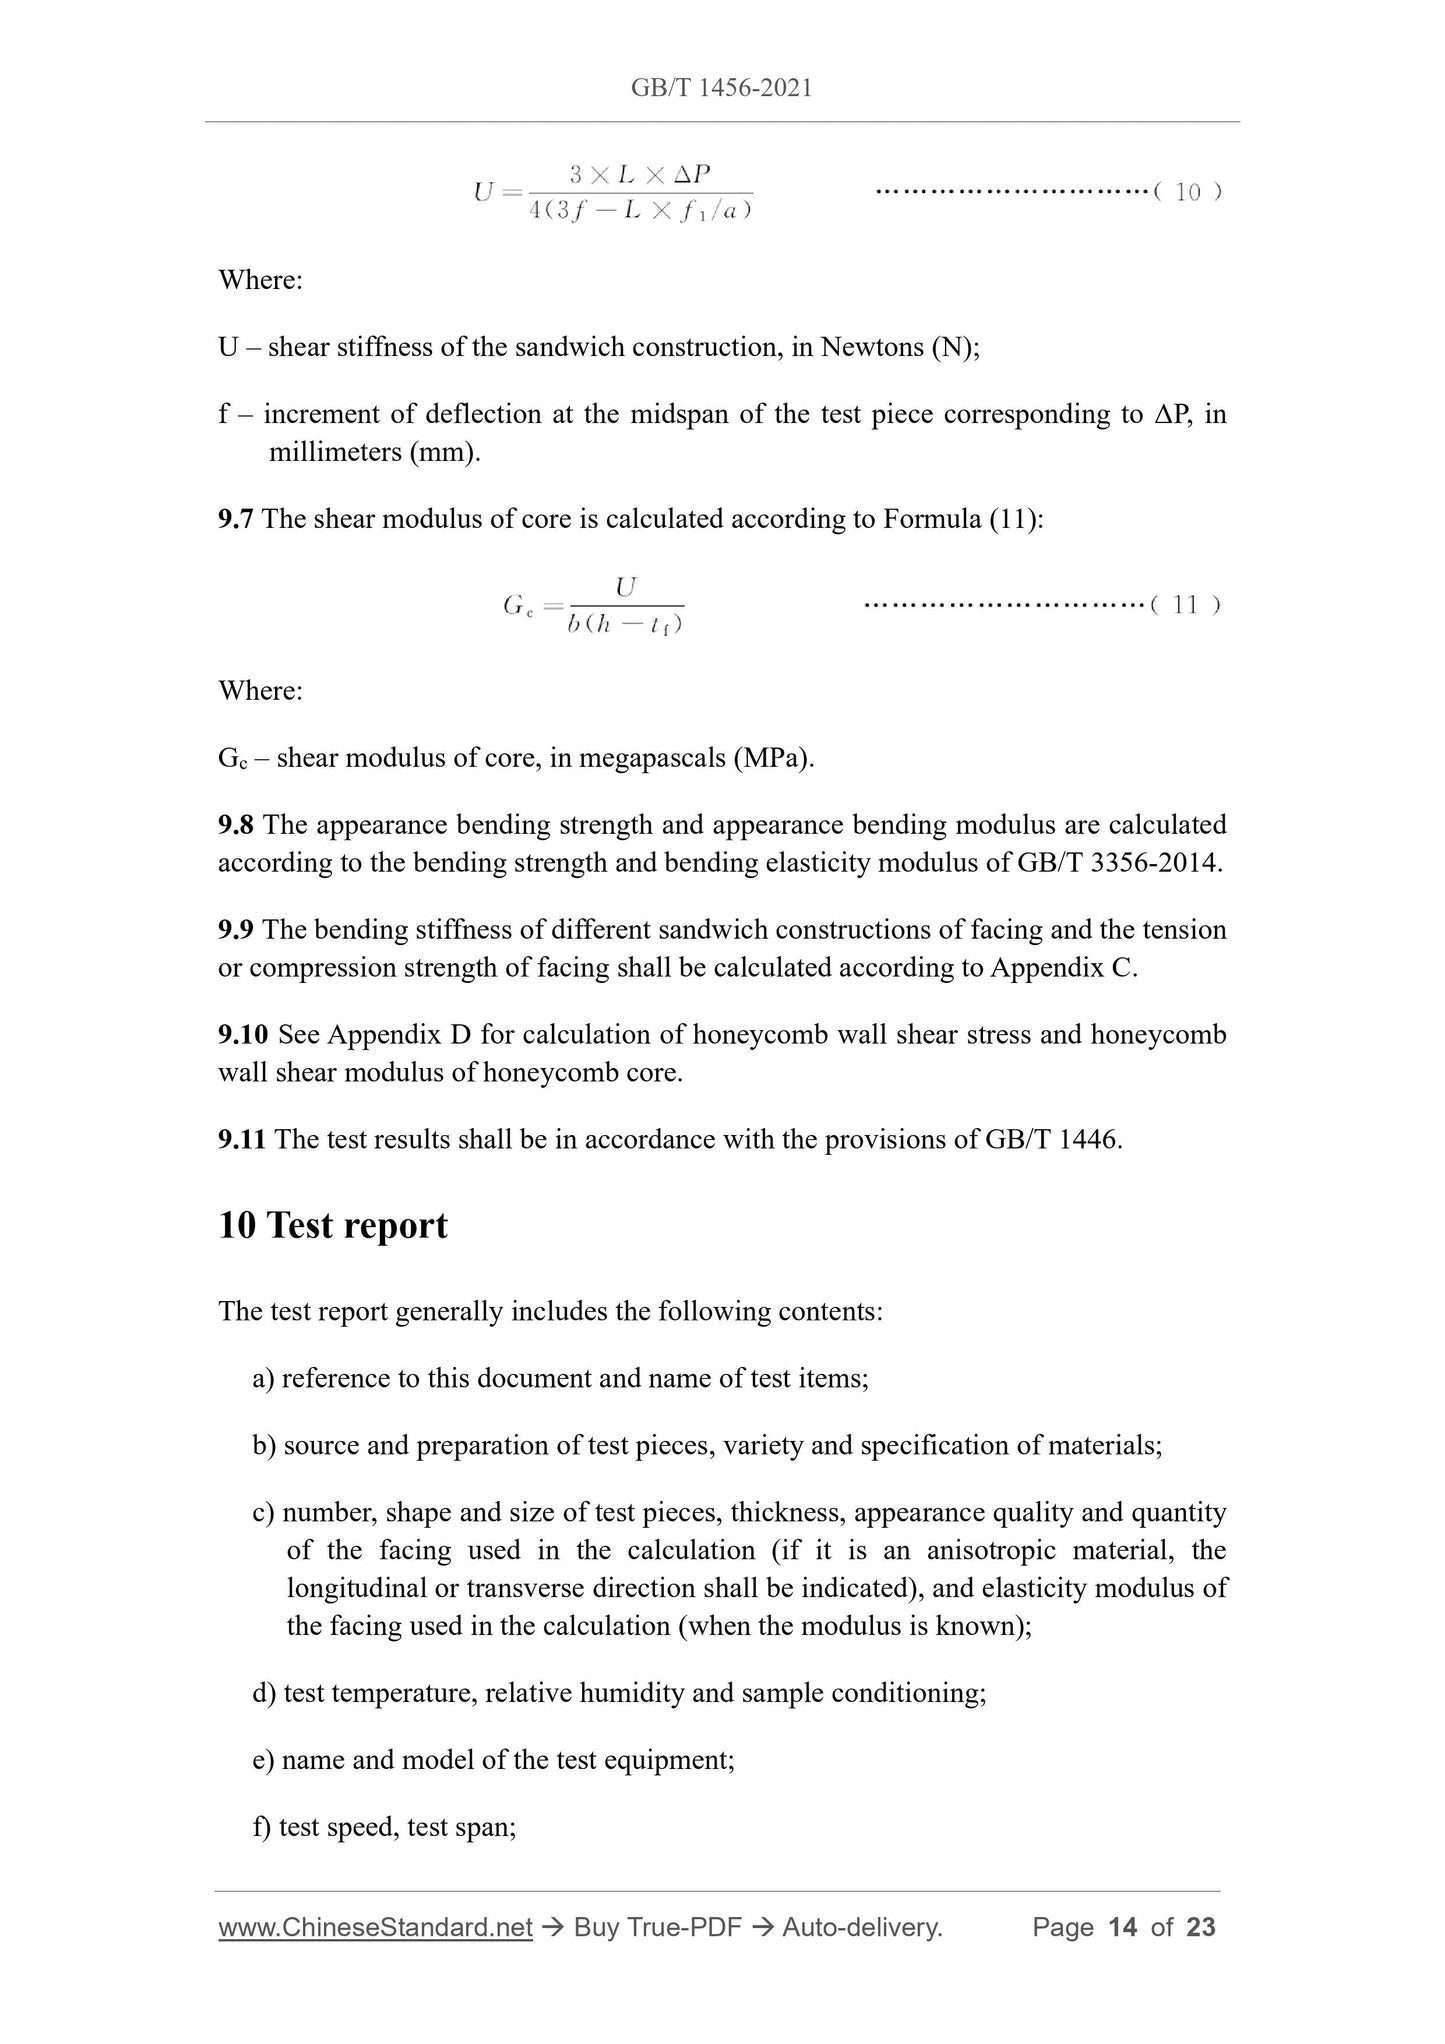 GB/T 1456-2021 Page 8